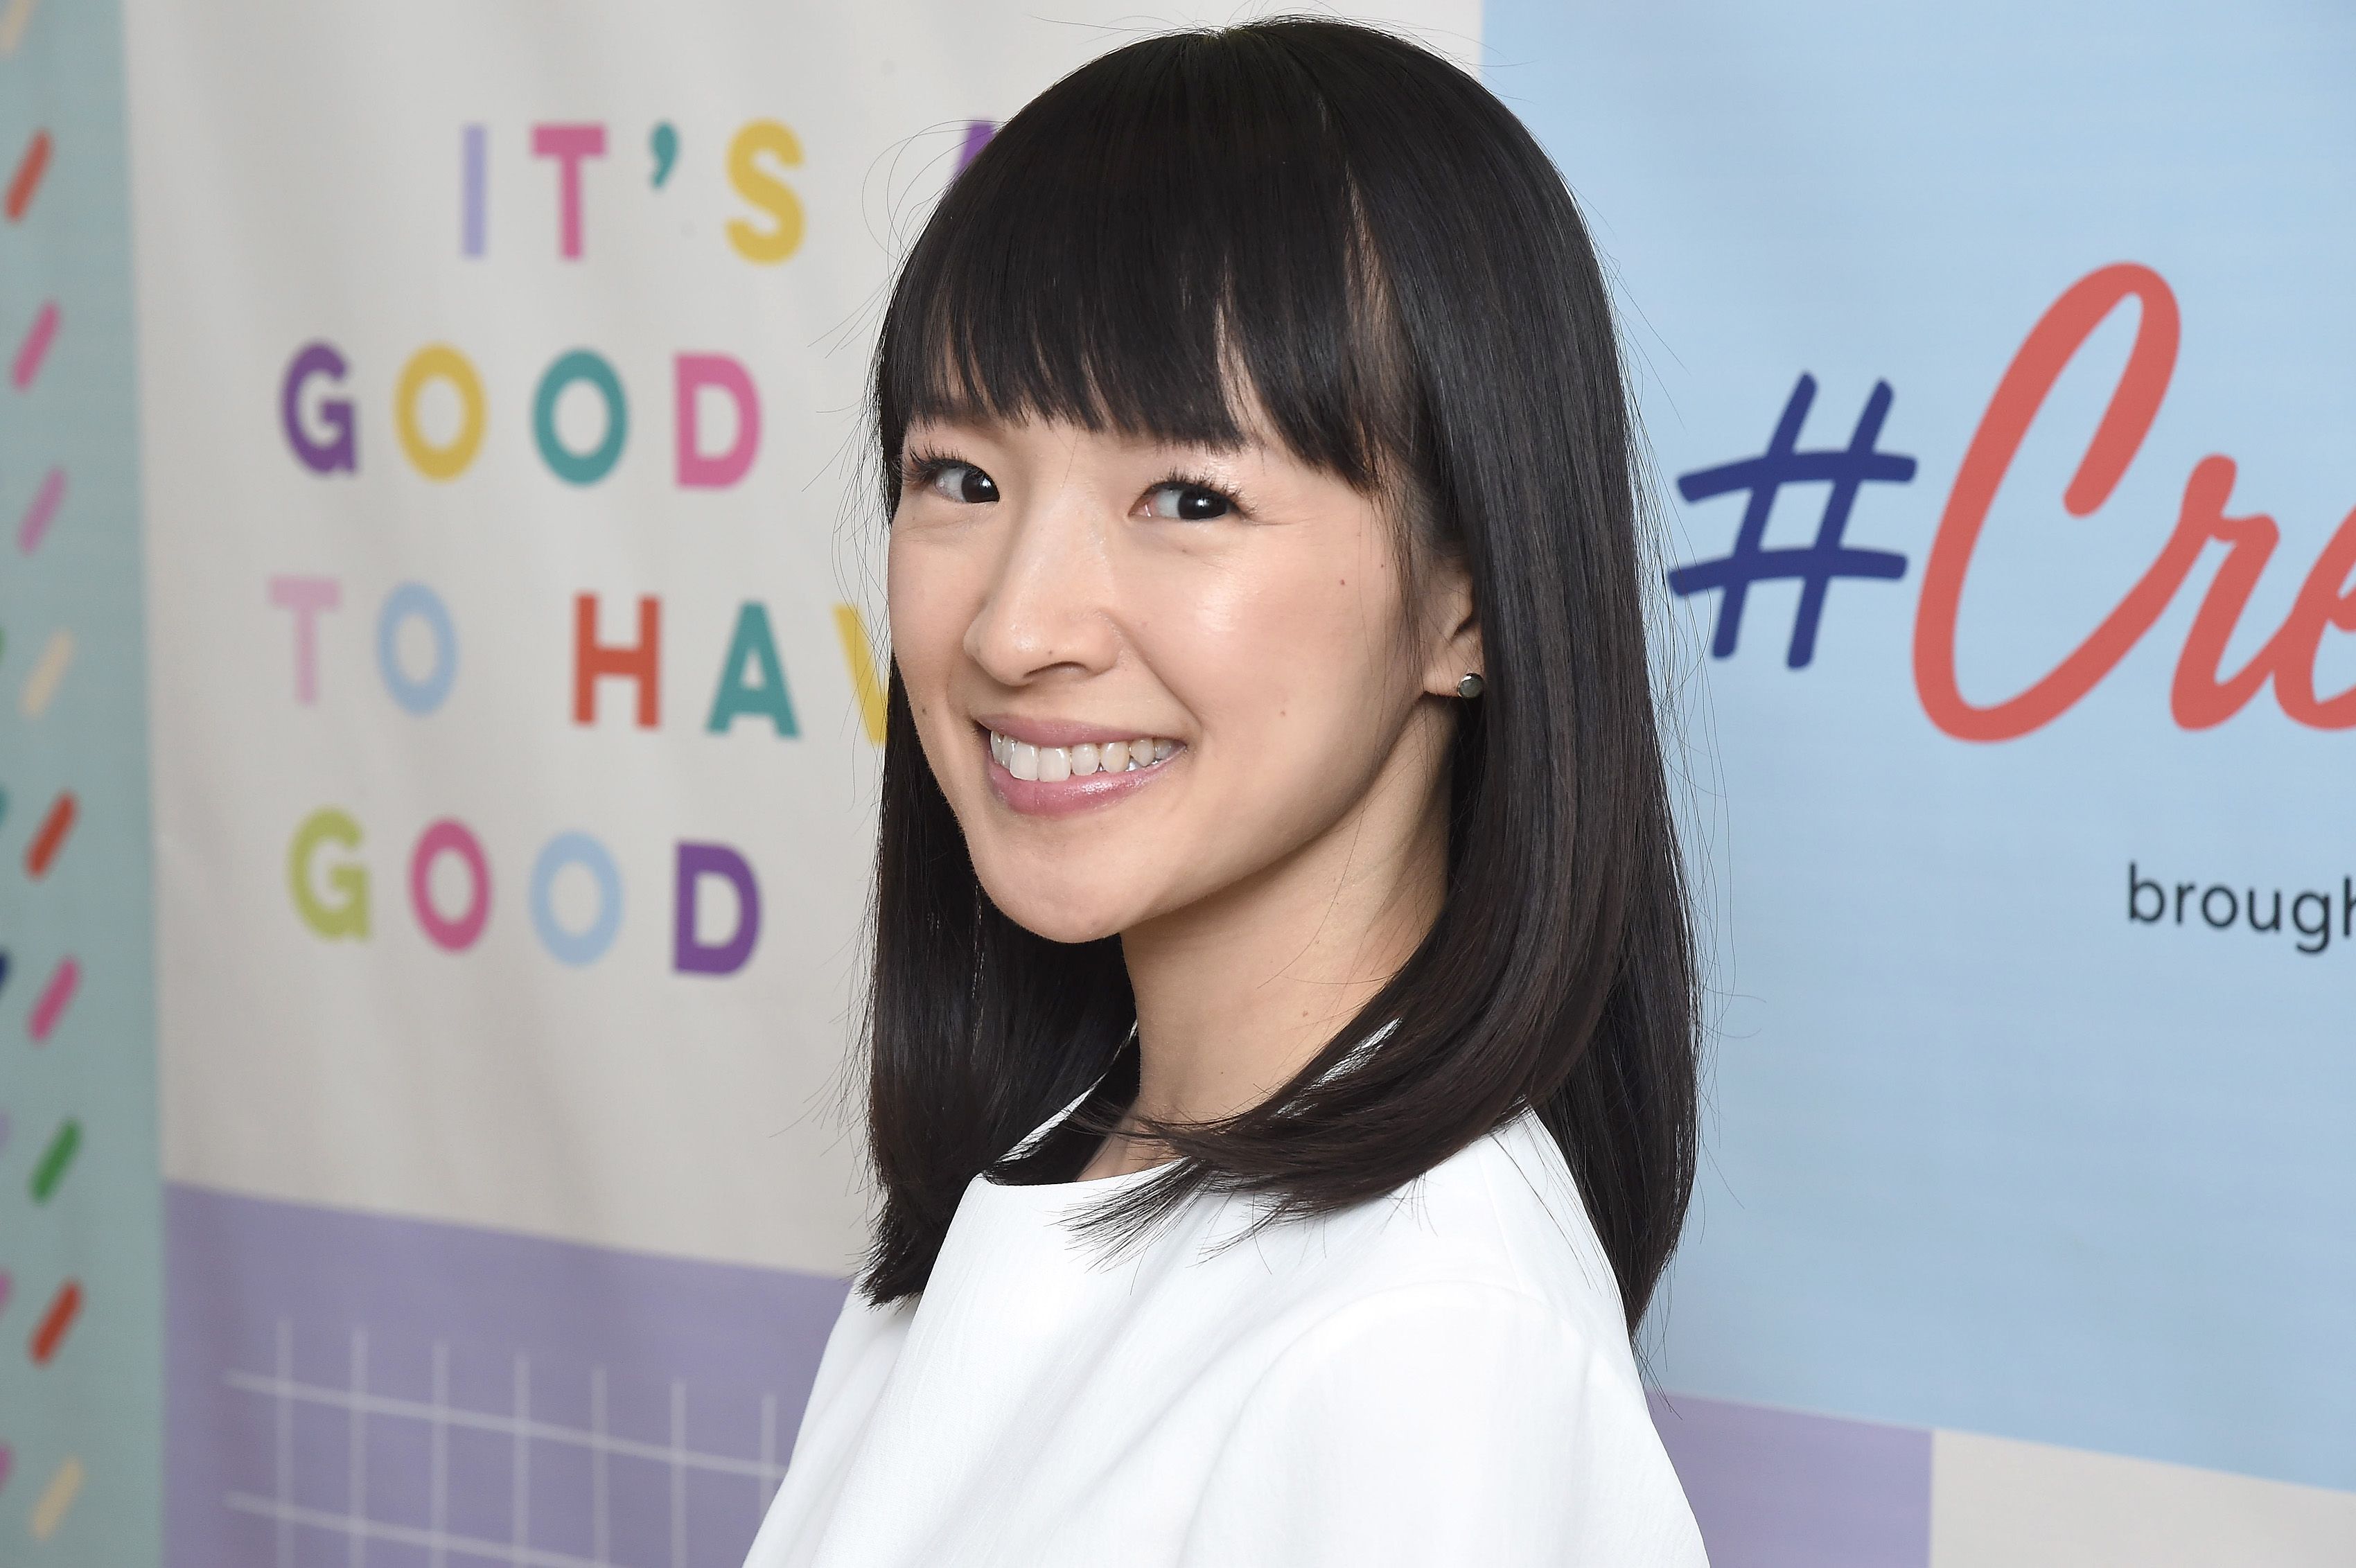 how much money does marie kondo make